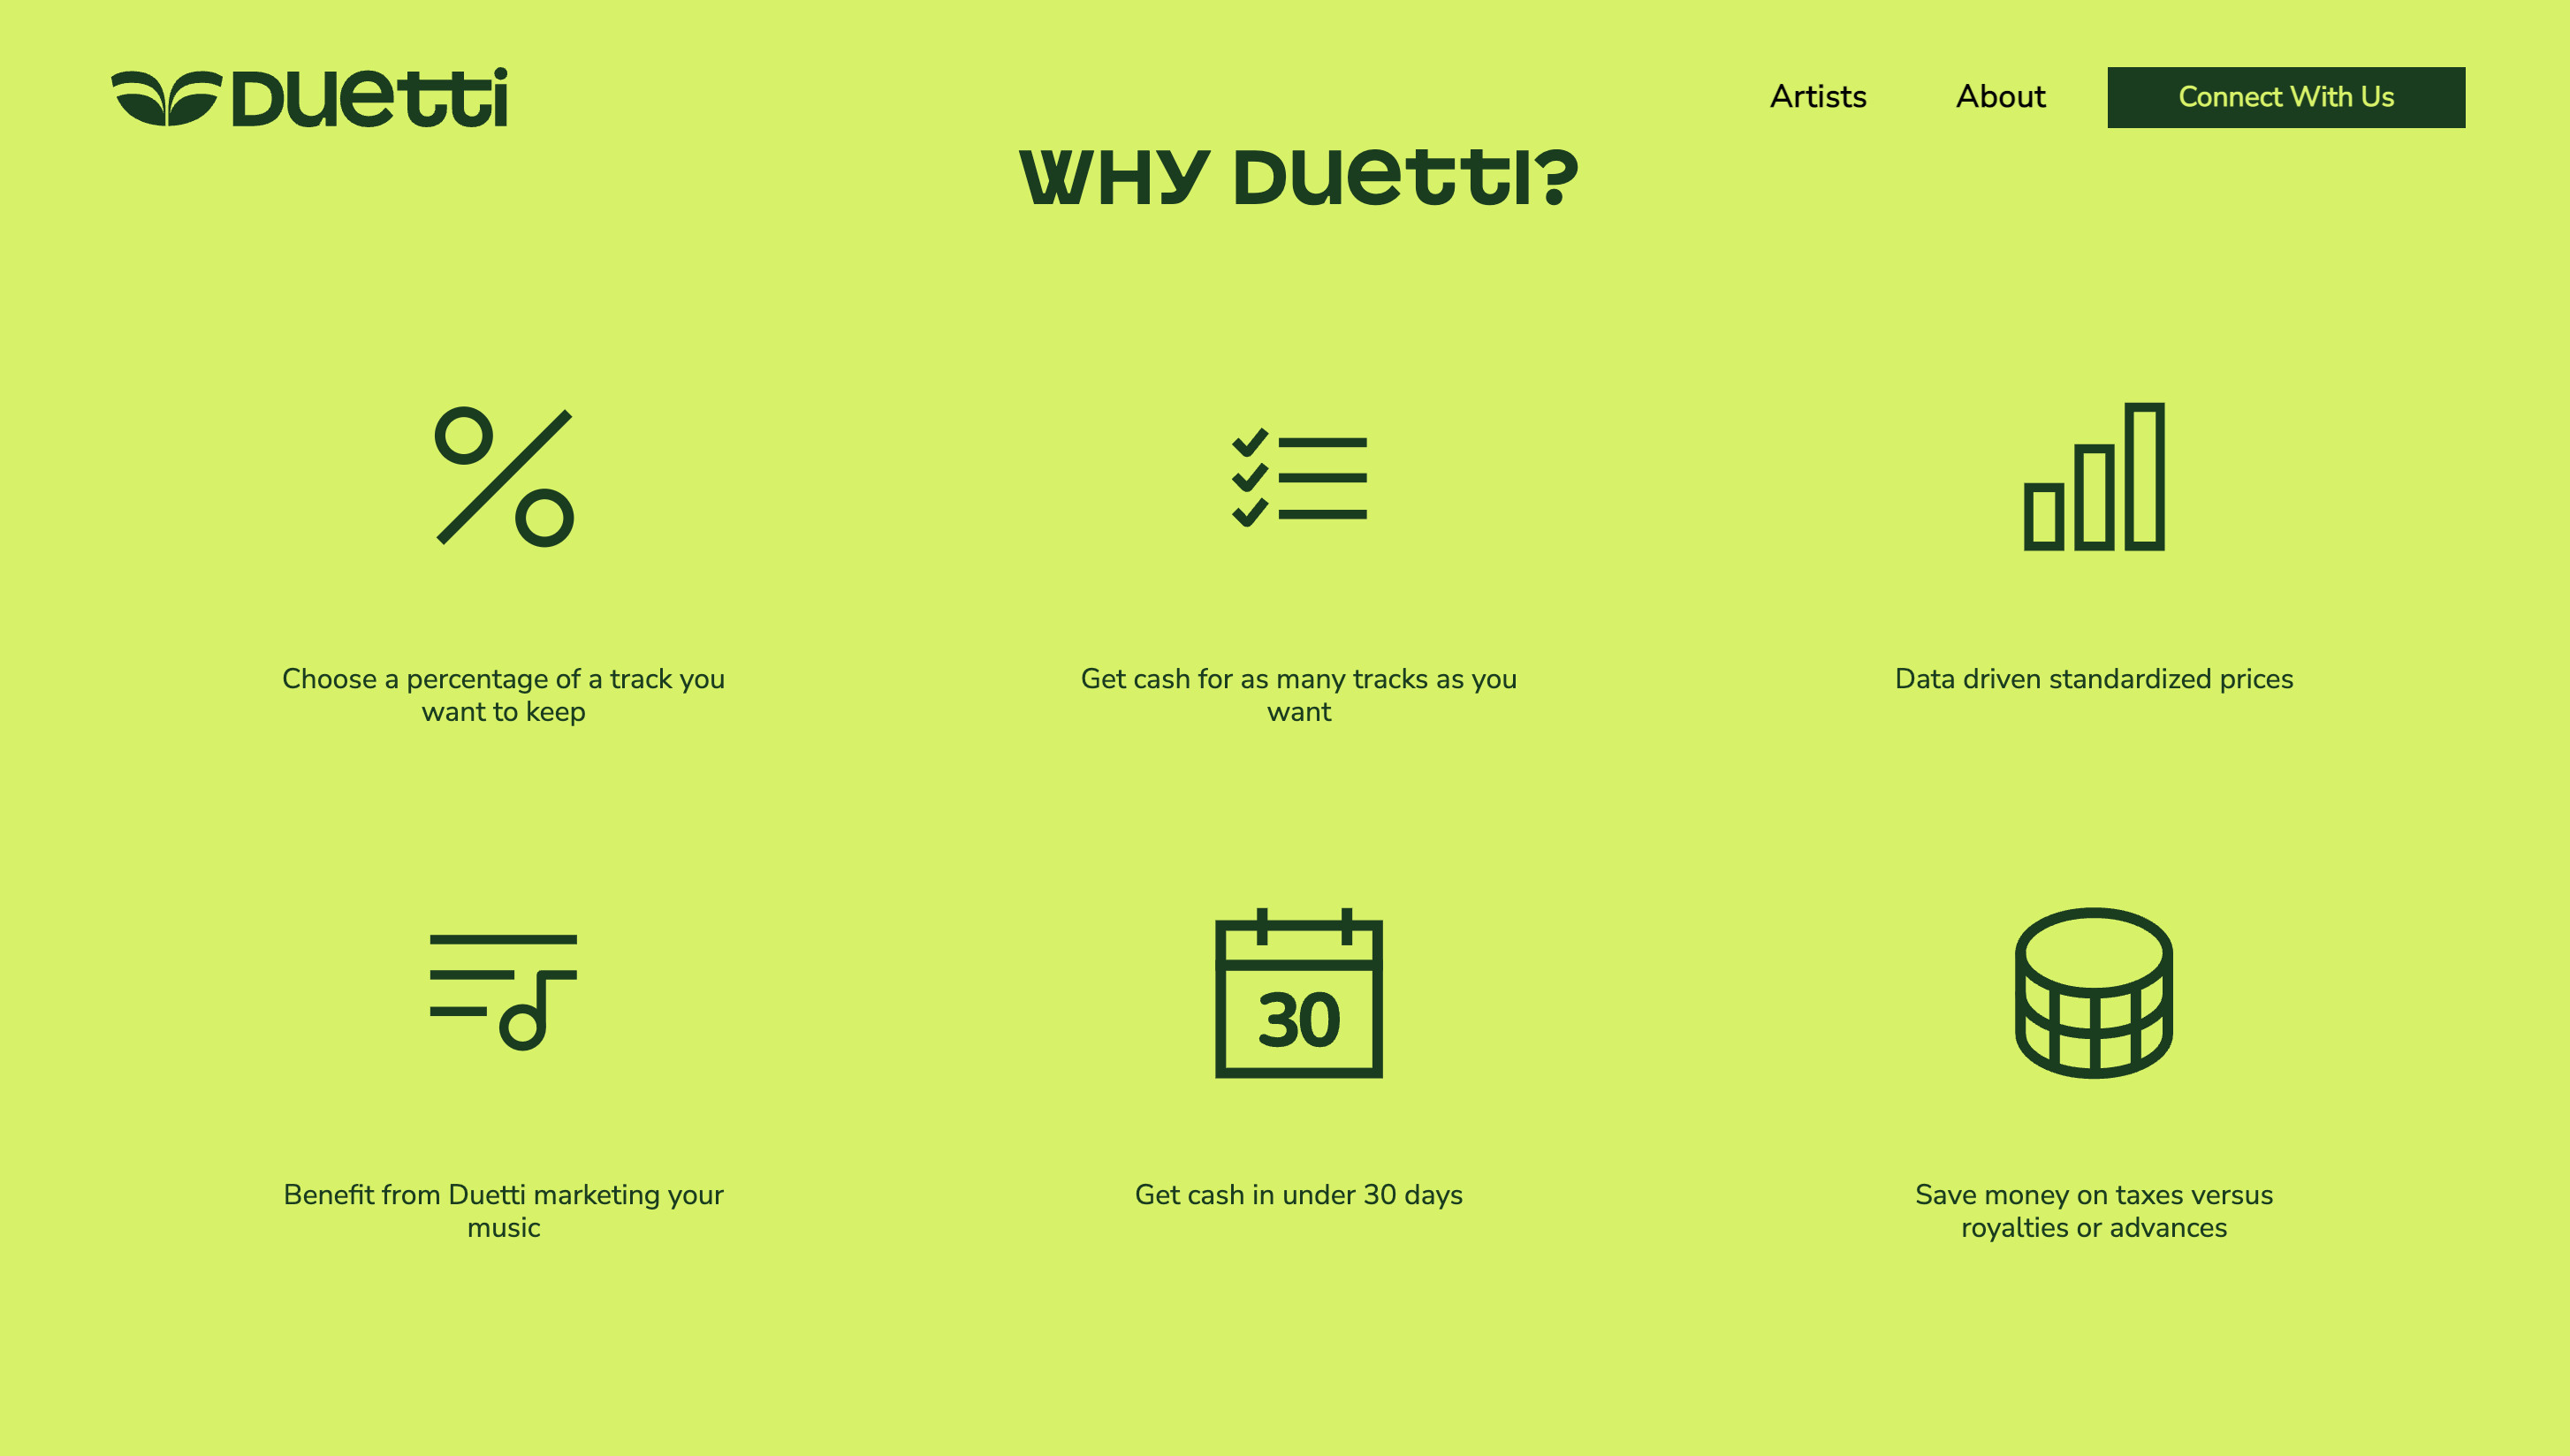 A bright and simple website explains that artists can sell a portion of the rights to their tracks and be supported and paid for by Duetti's marketing.